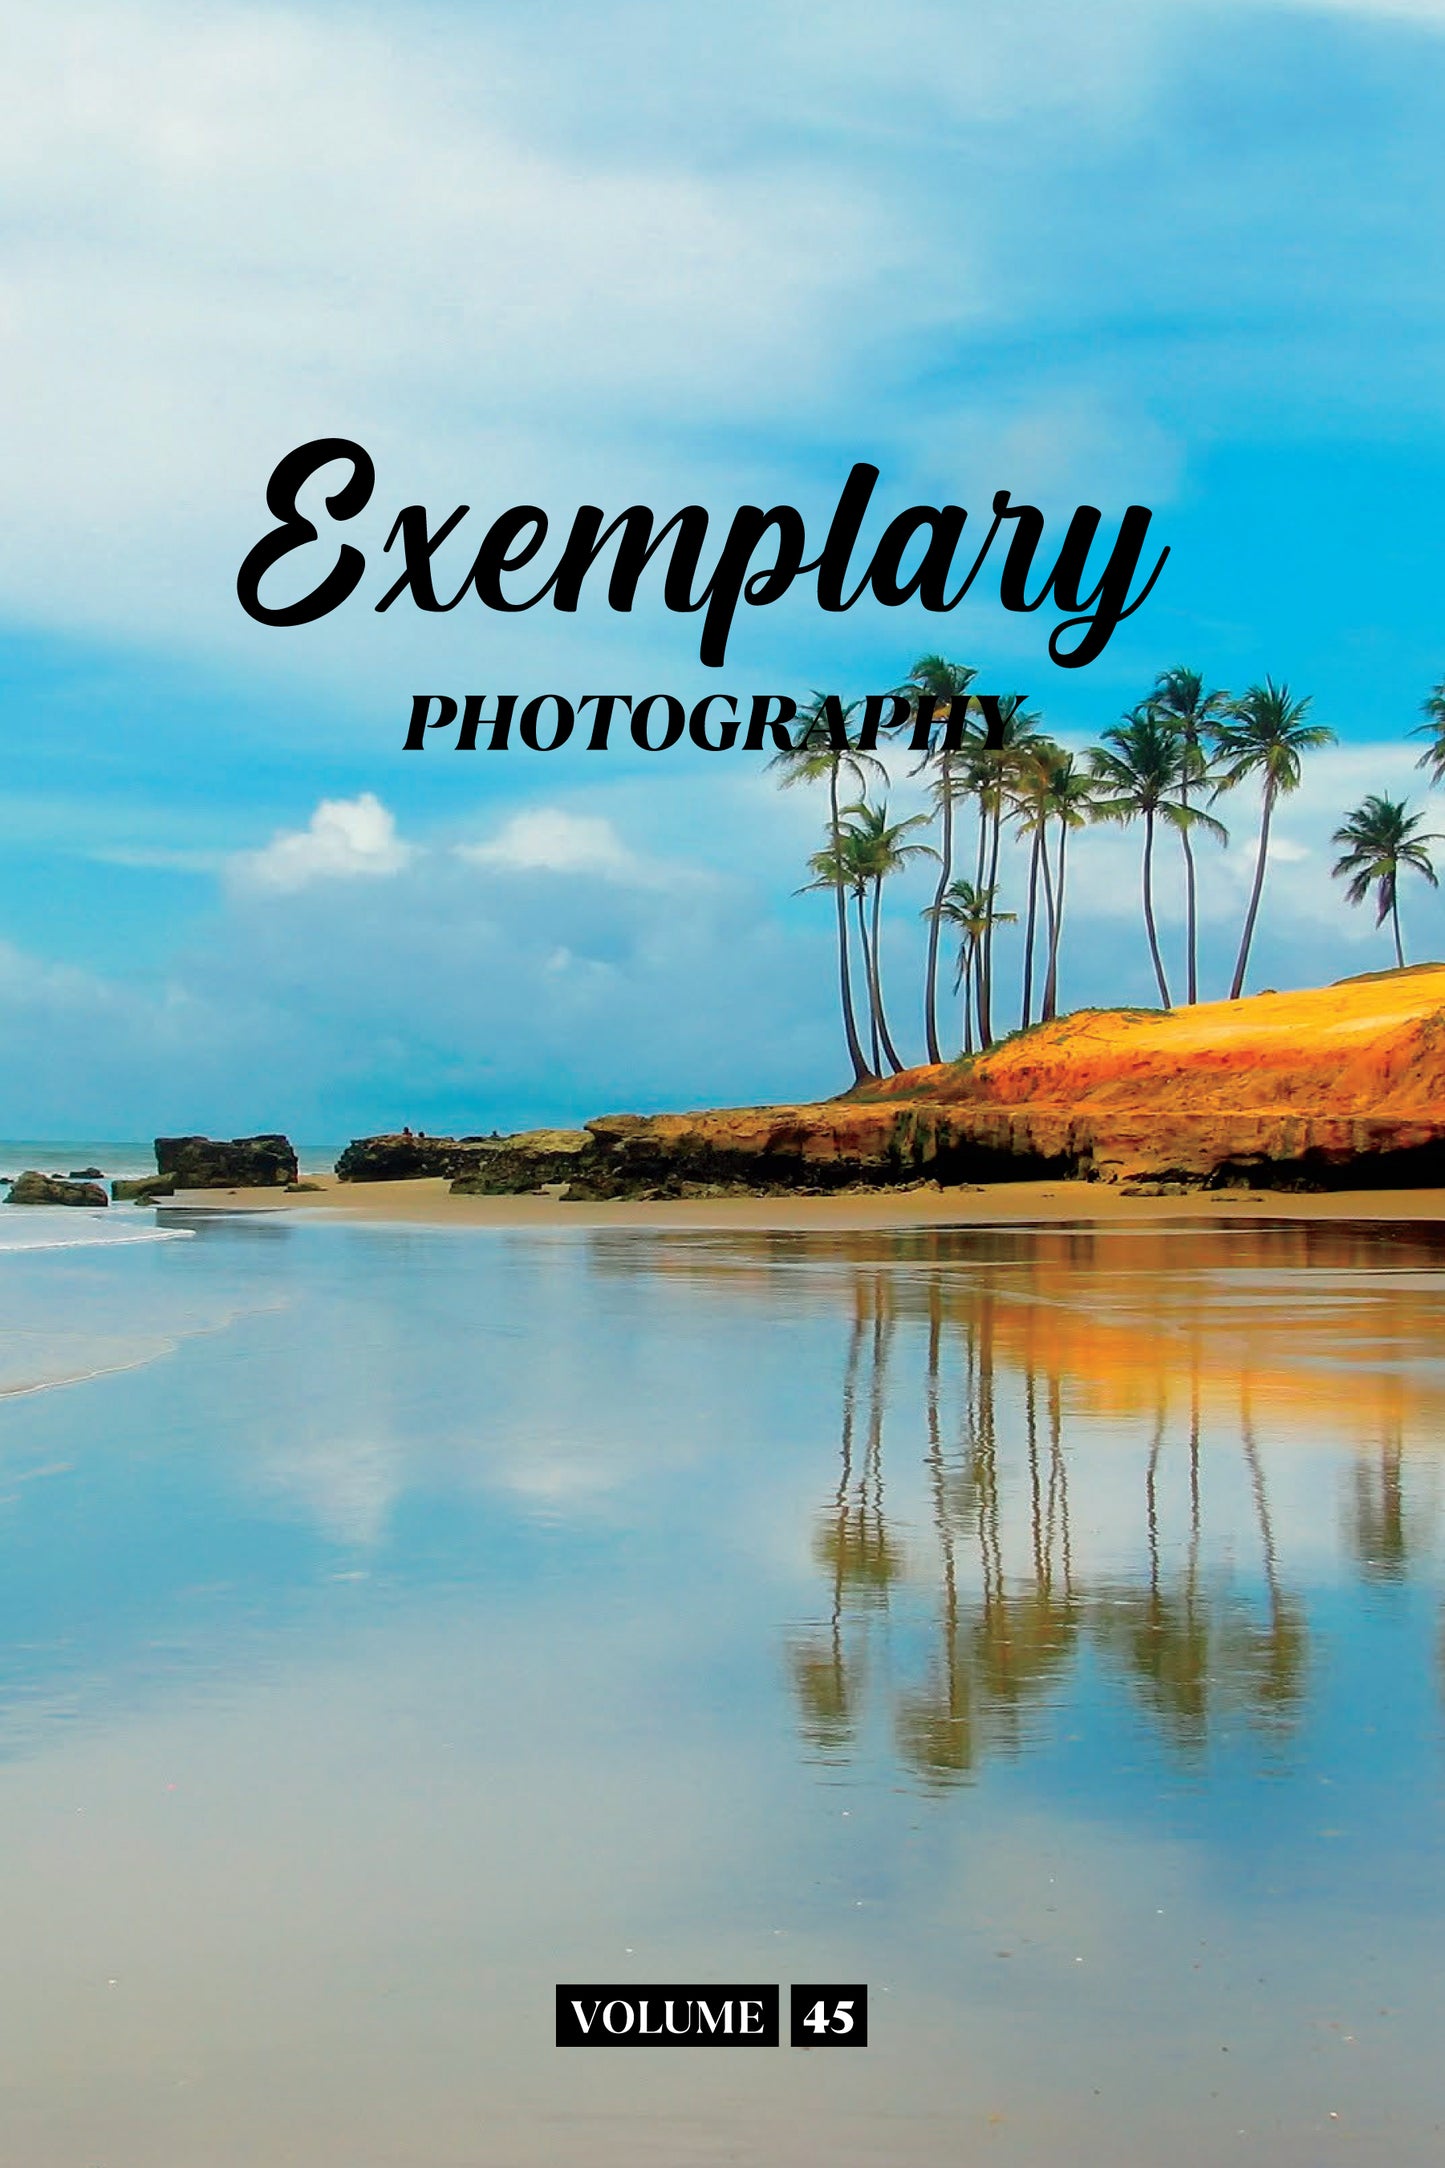 Exemplary Photography Volume 45 (Physical Book Pre-Order)